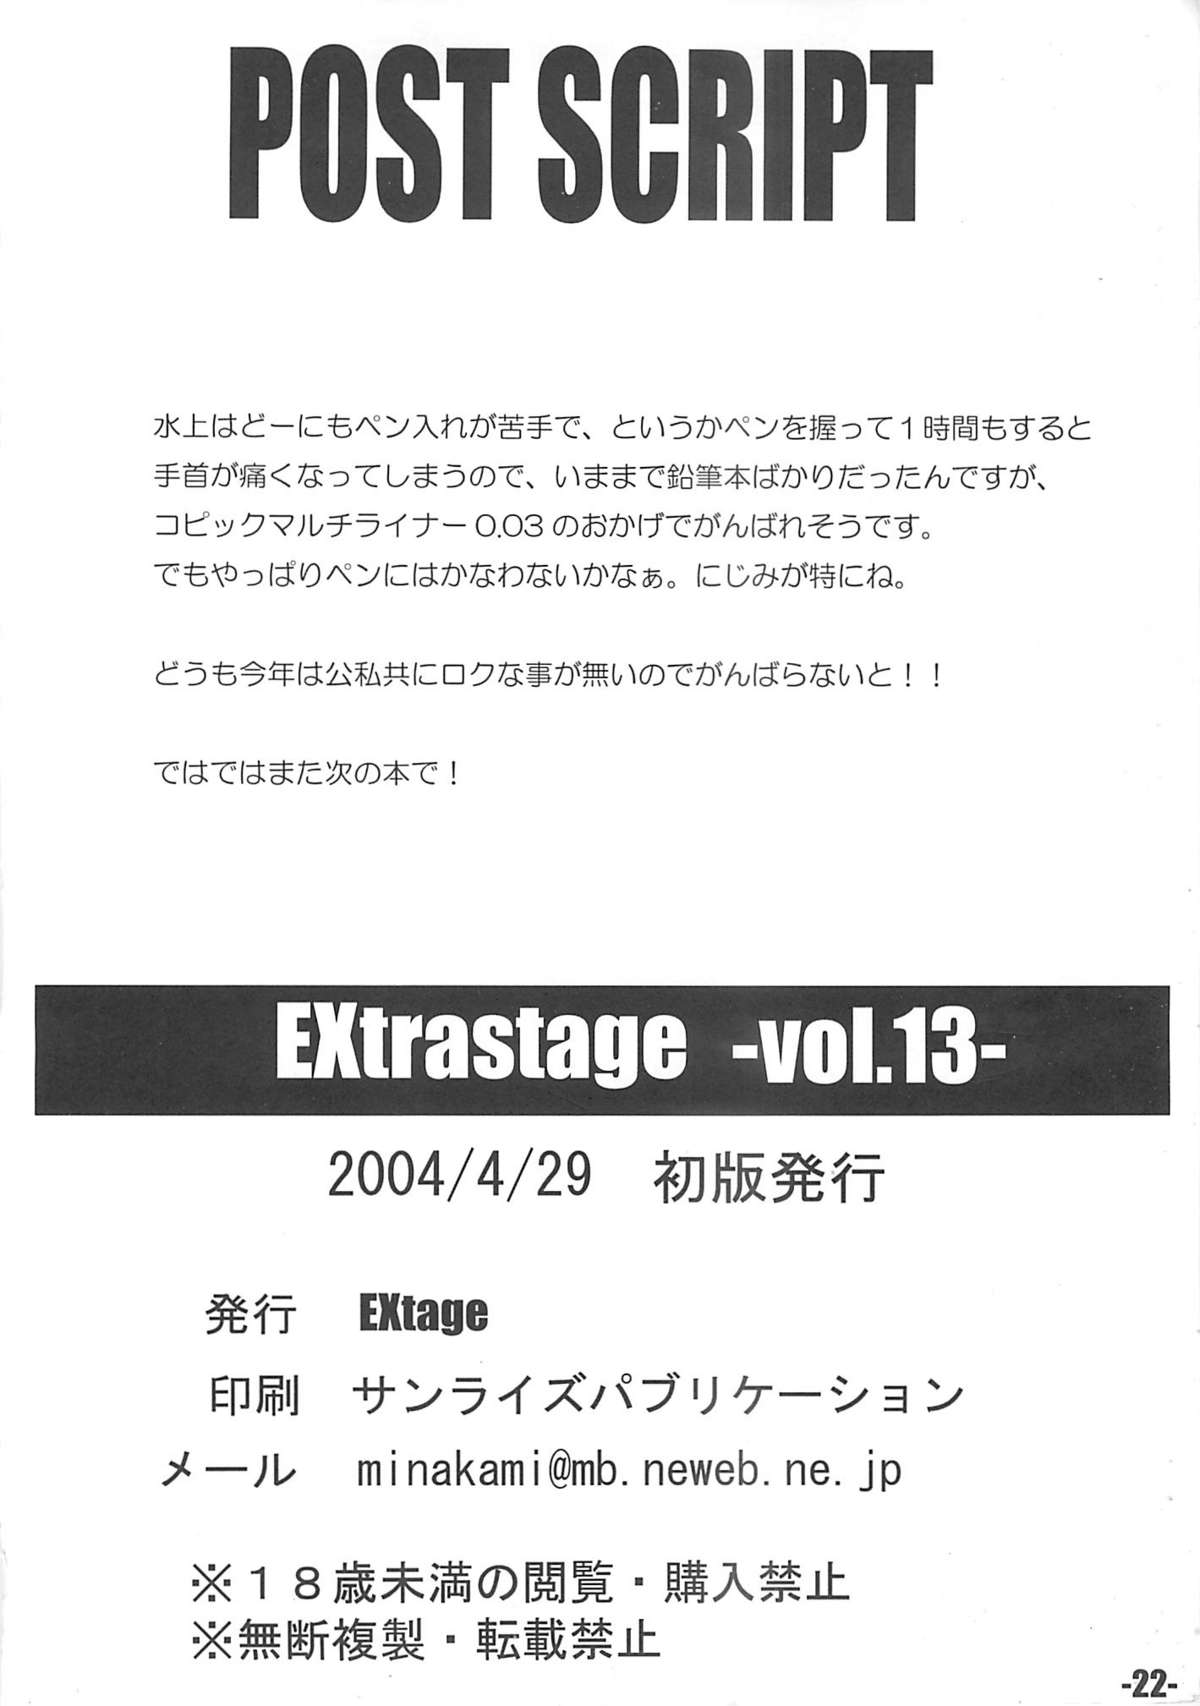 (Cレヴォ35) [EXtage (水上広樹)] EXtra stage vol.13 (Fate/stay night)